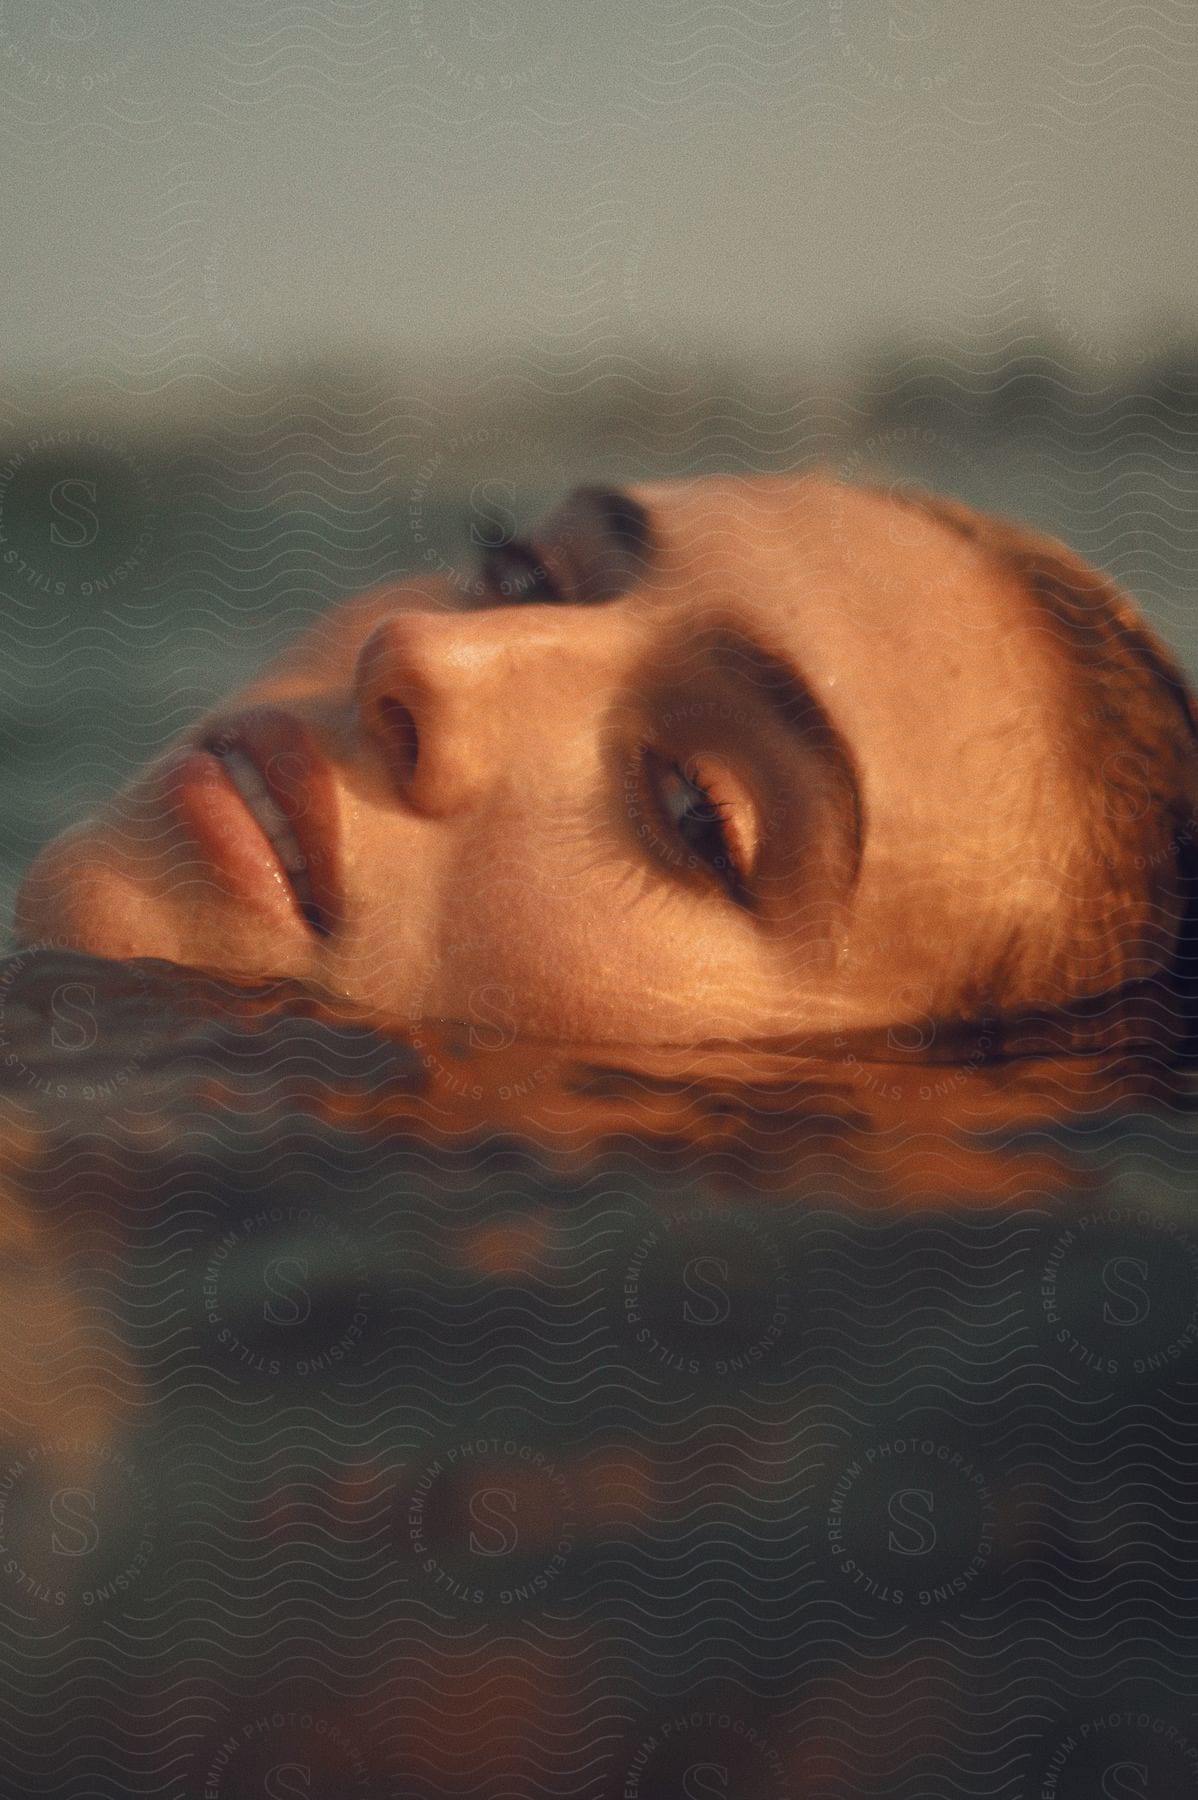 Close-up of a woman's face partially submerged in water, illuminated by golden sunlight.